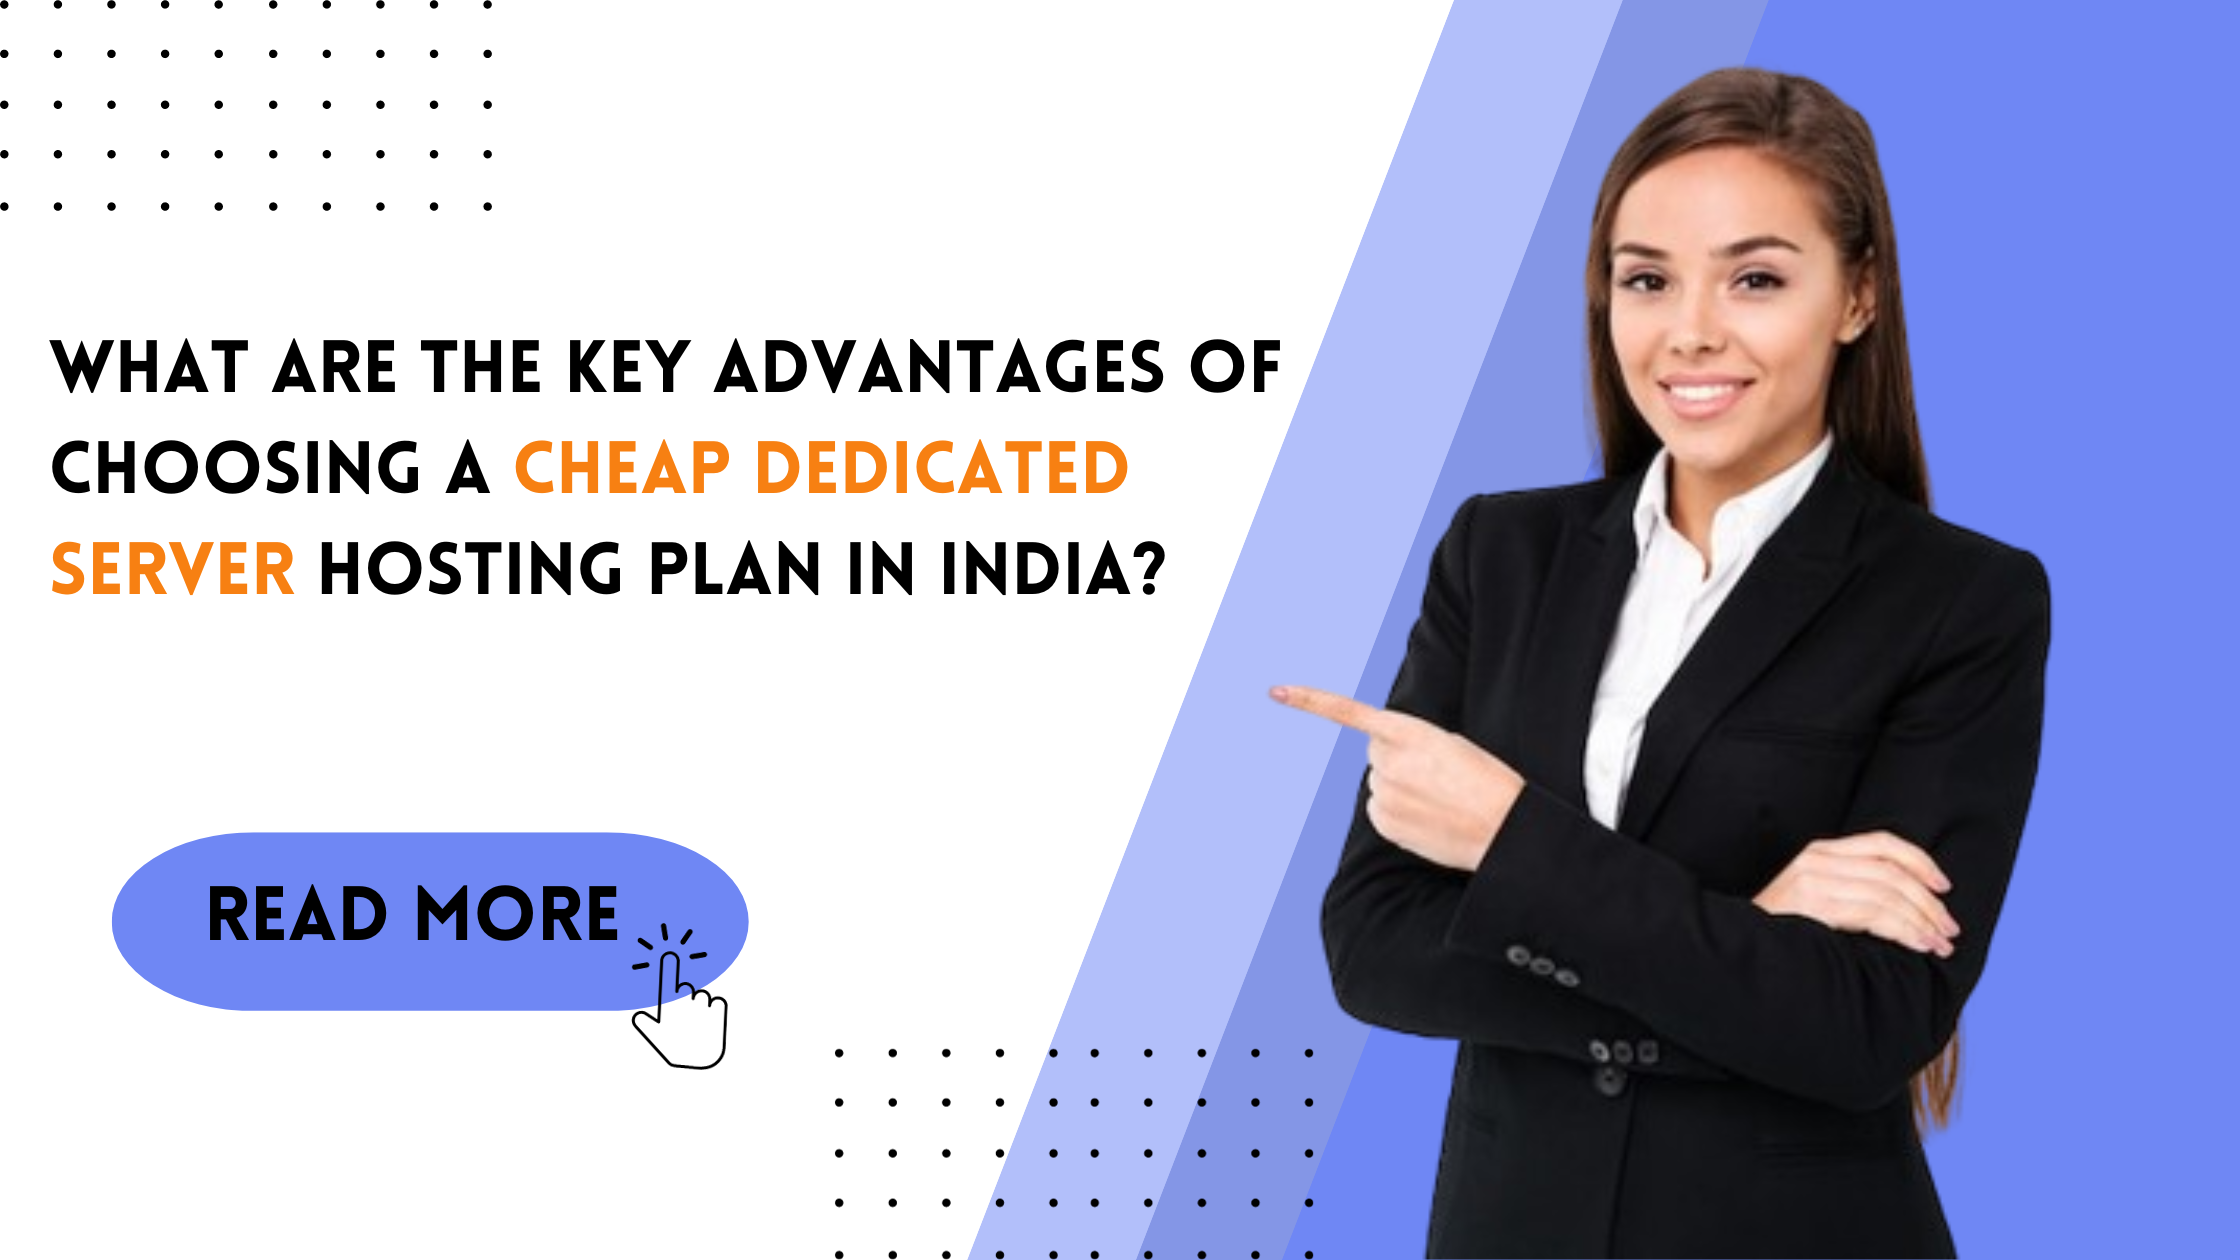 the Key Advantages of Choosing a Cheap Dedicated Server Hosting Plan in India